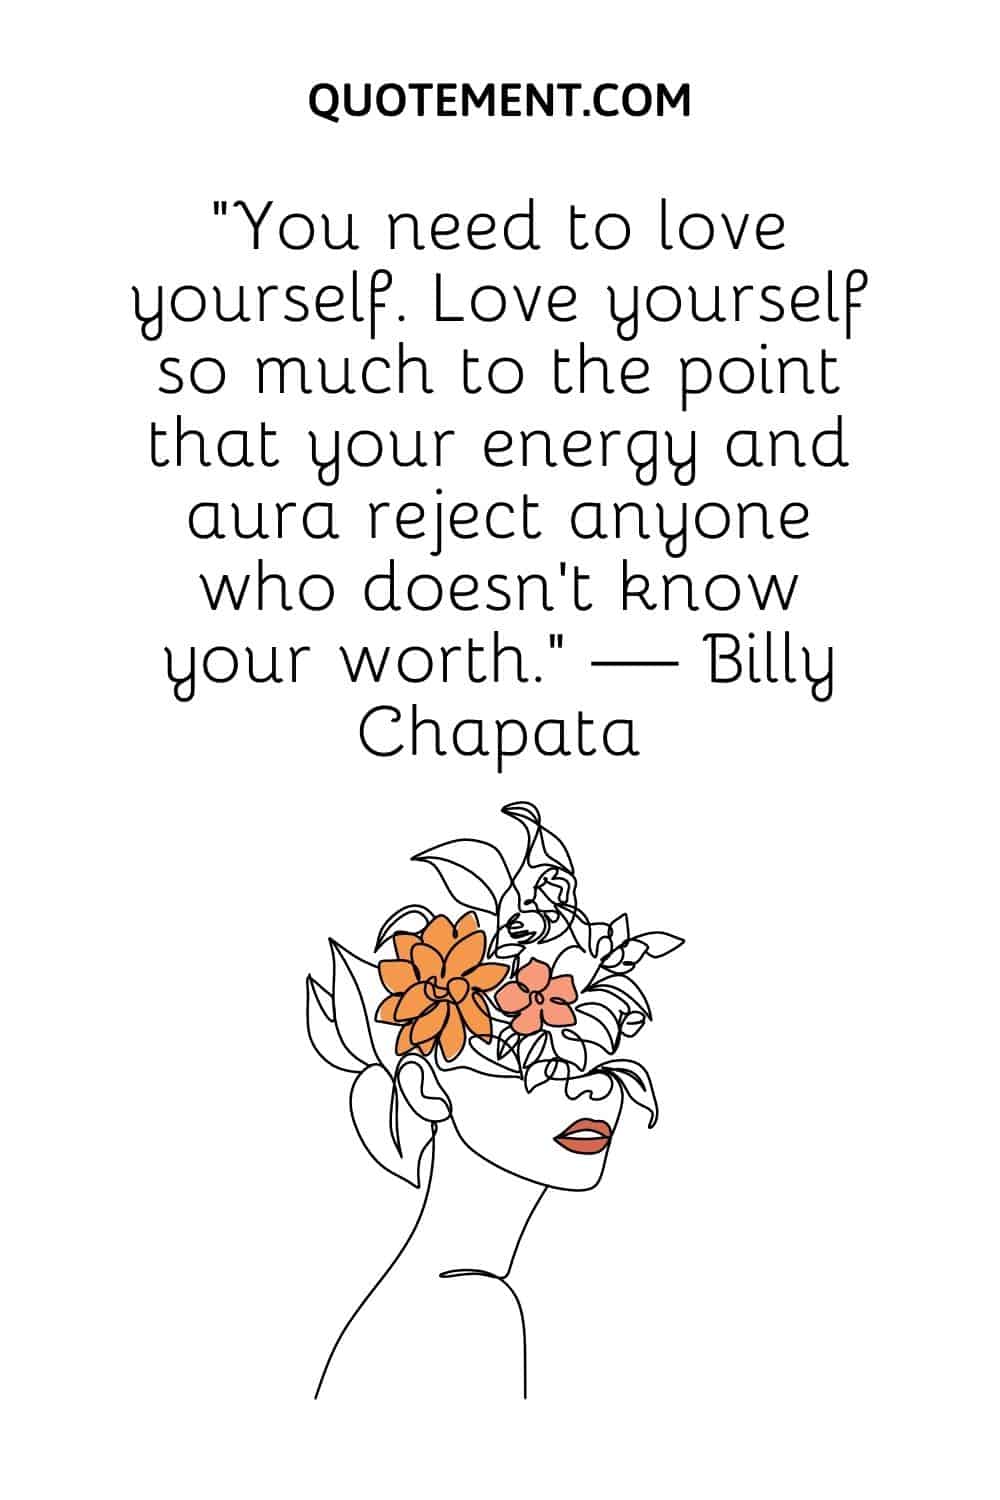 You need to love yourself